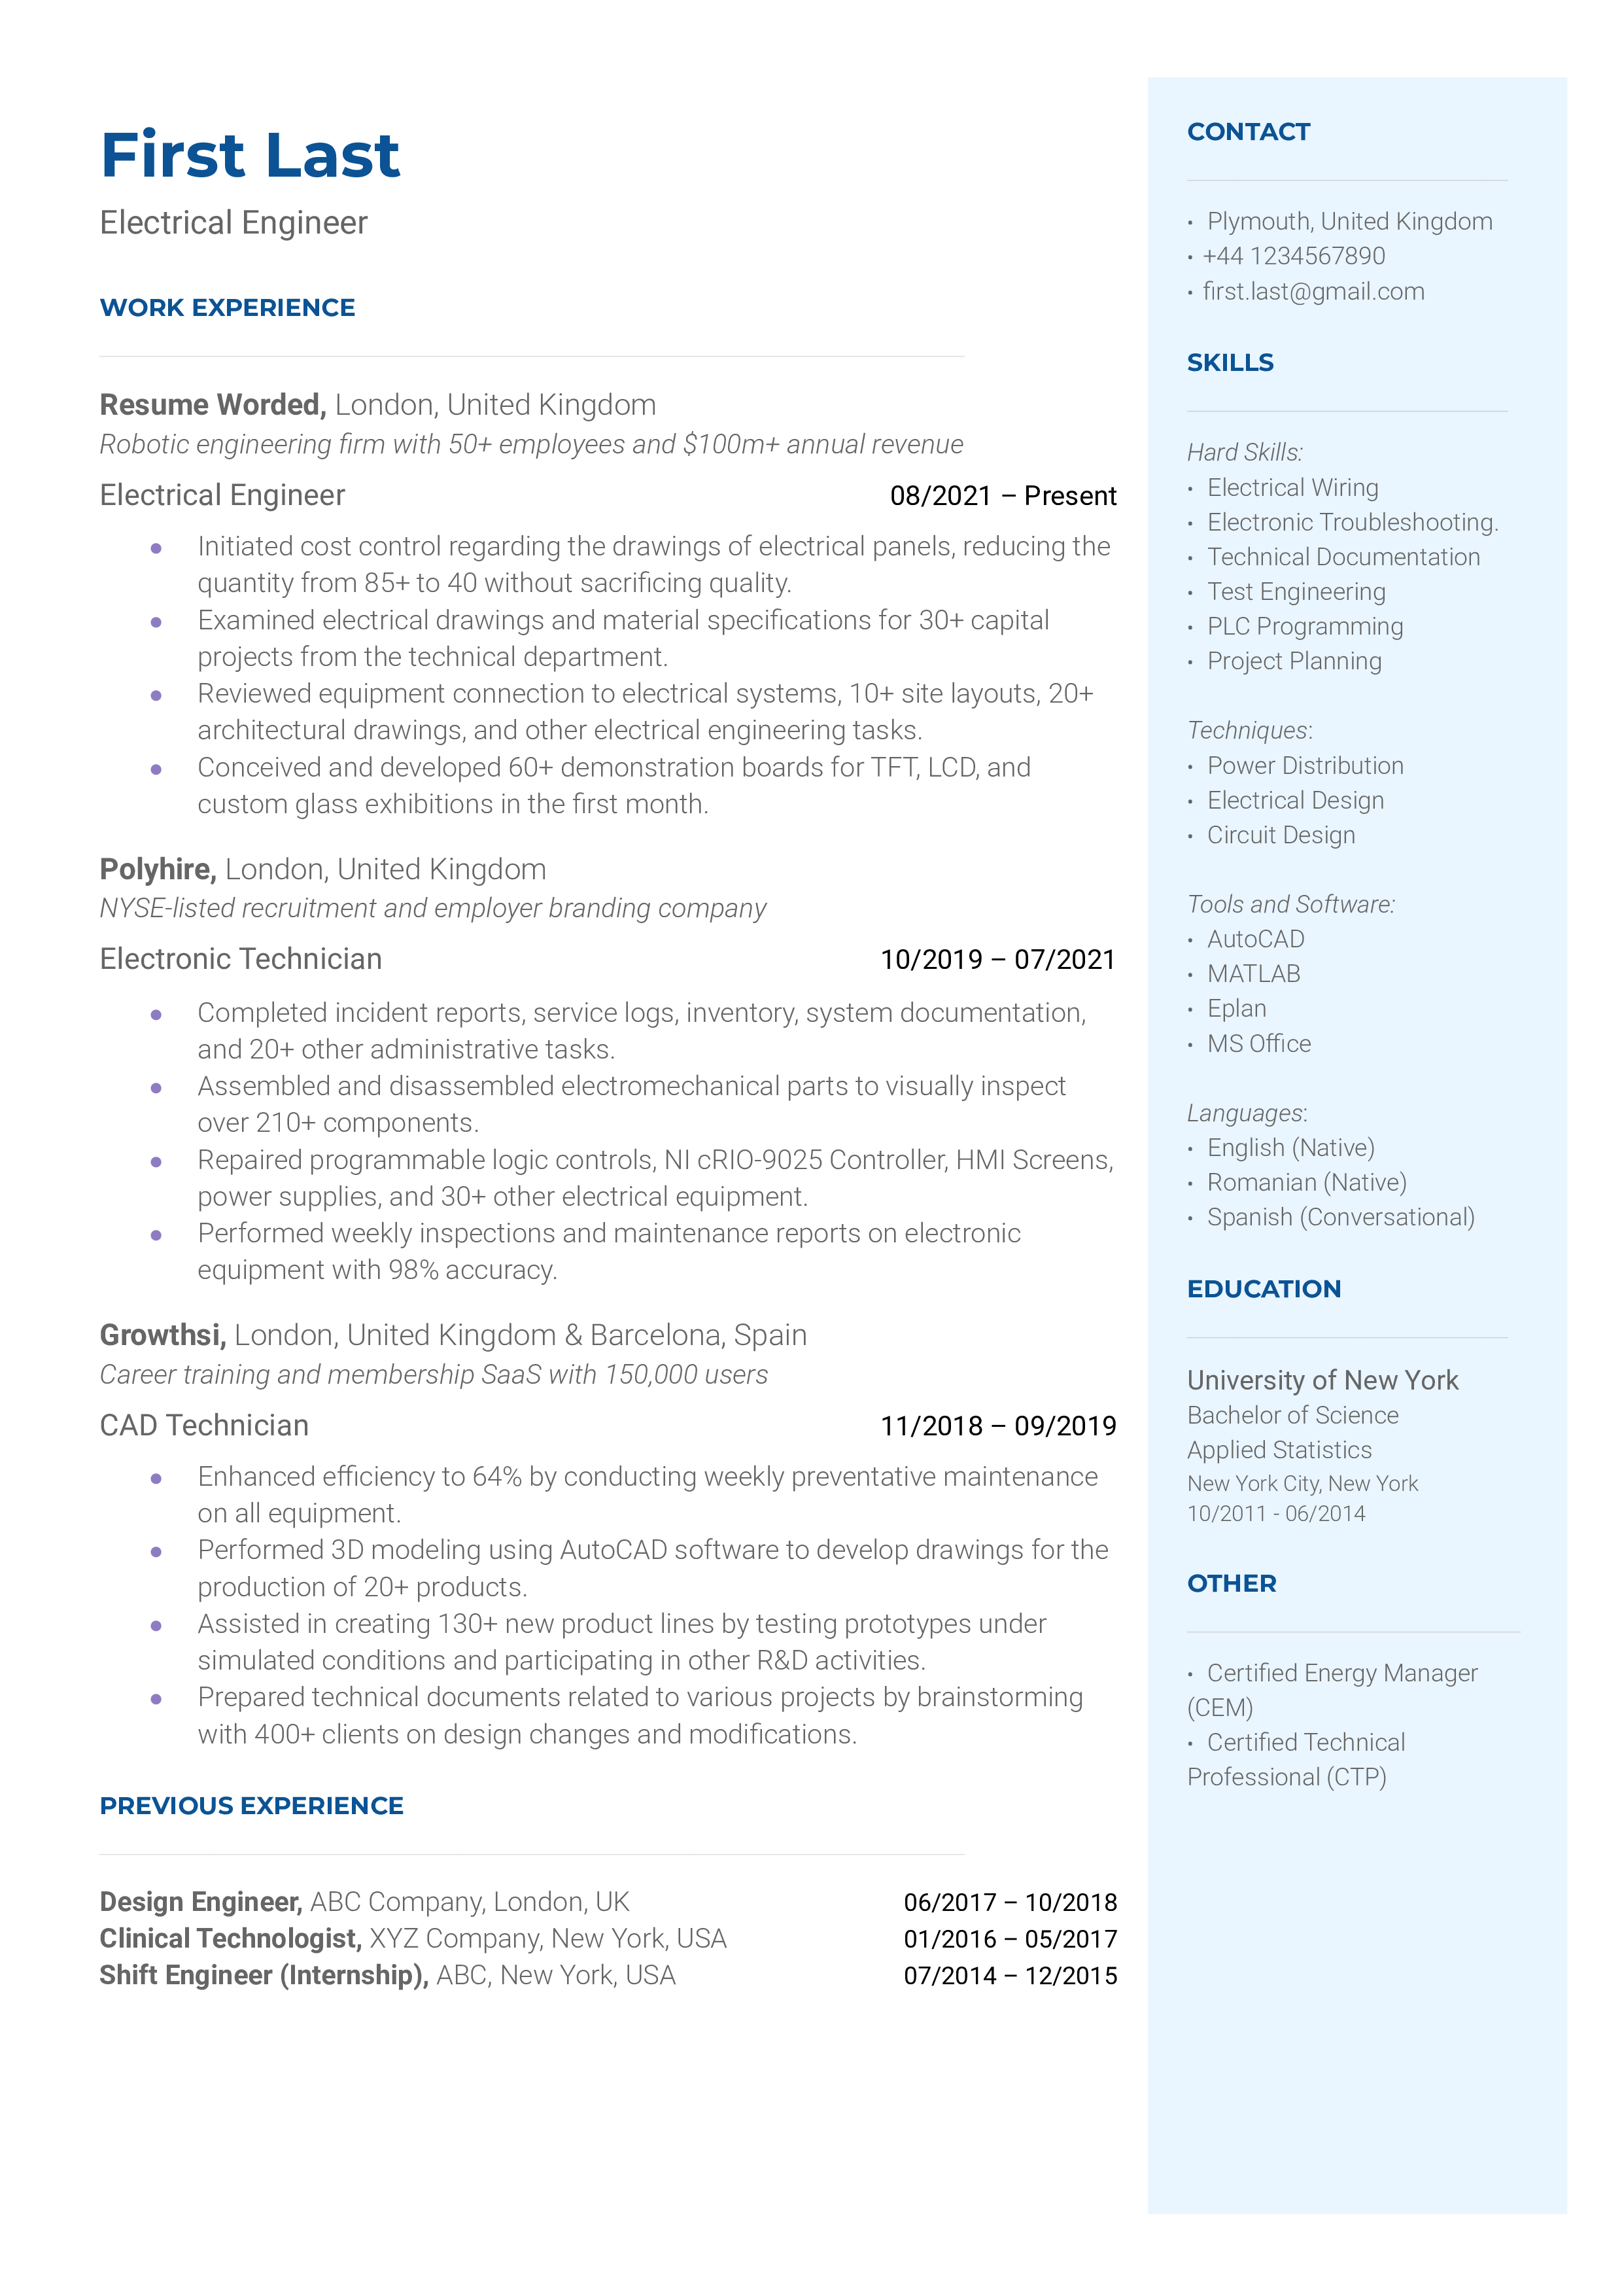 CV for an electrical engineer showcasing technical skills and project-based experiences.